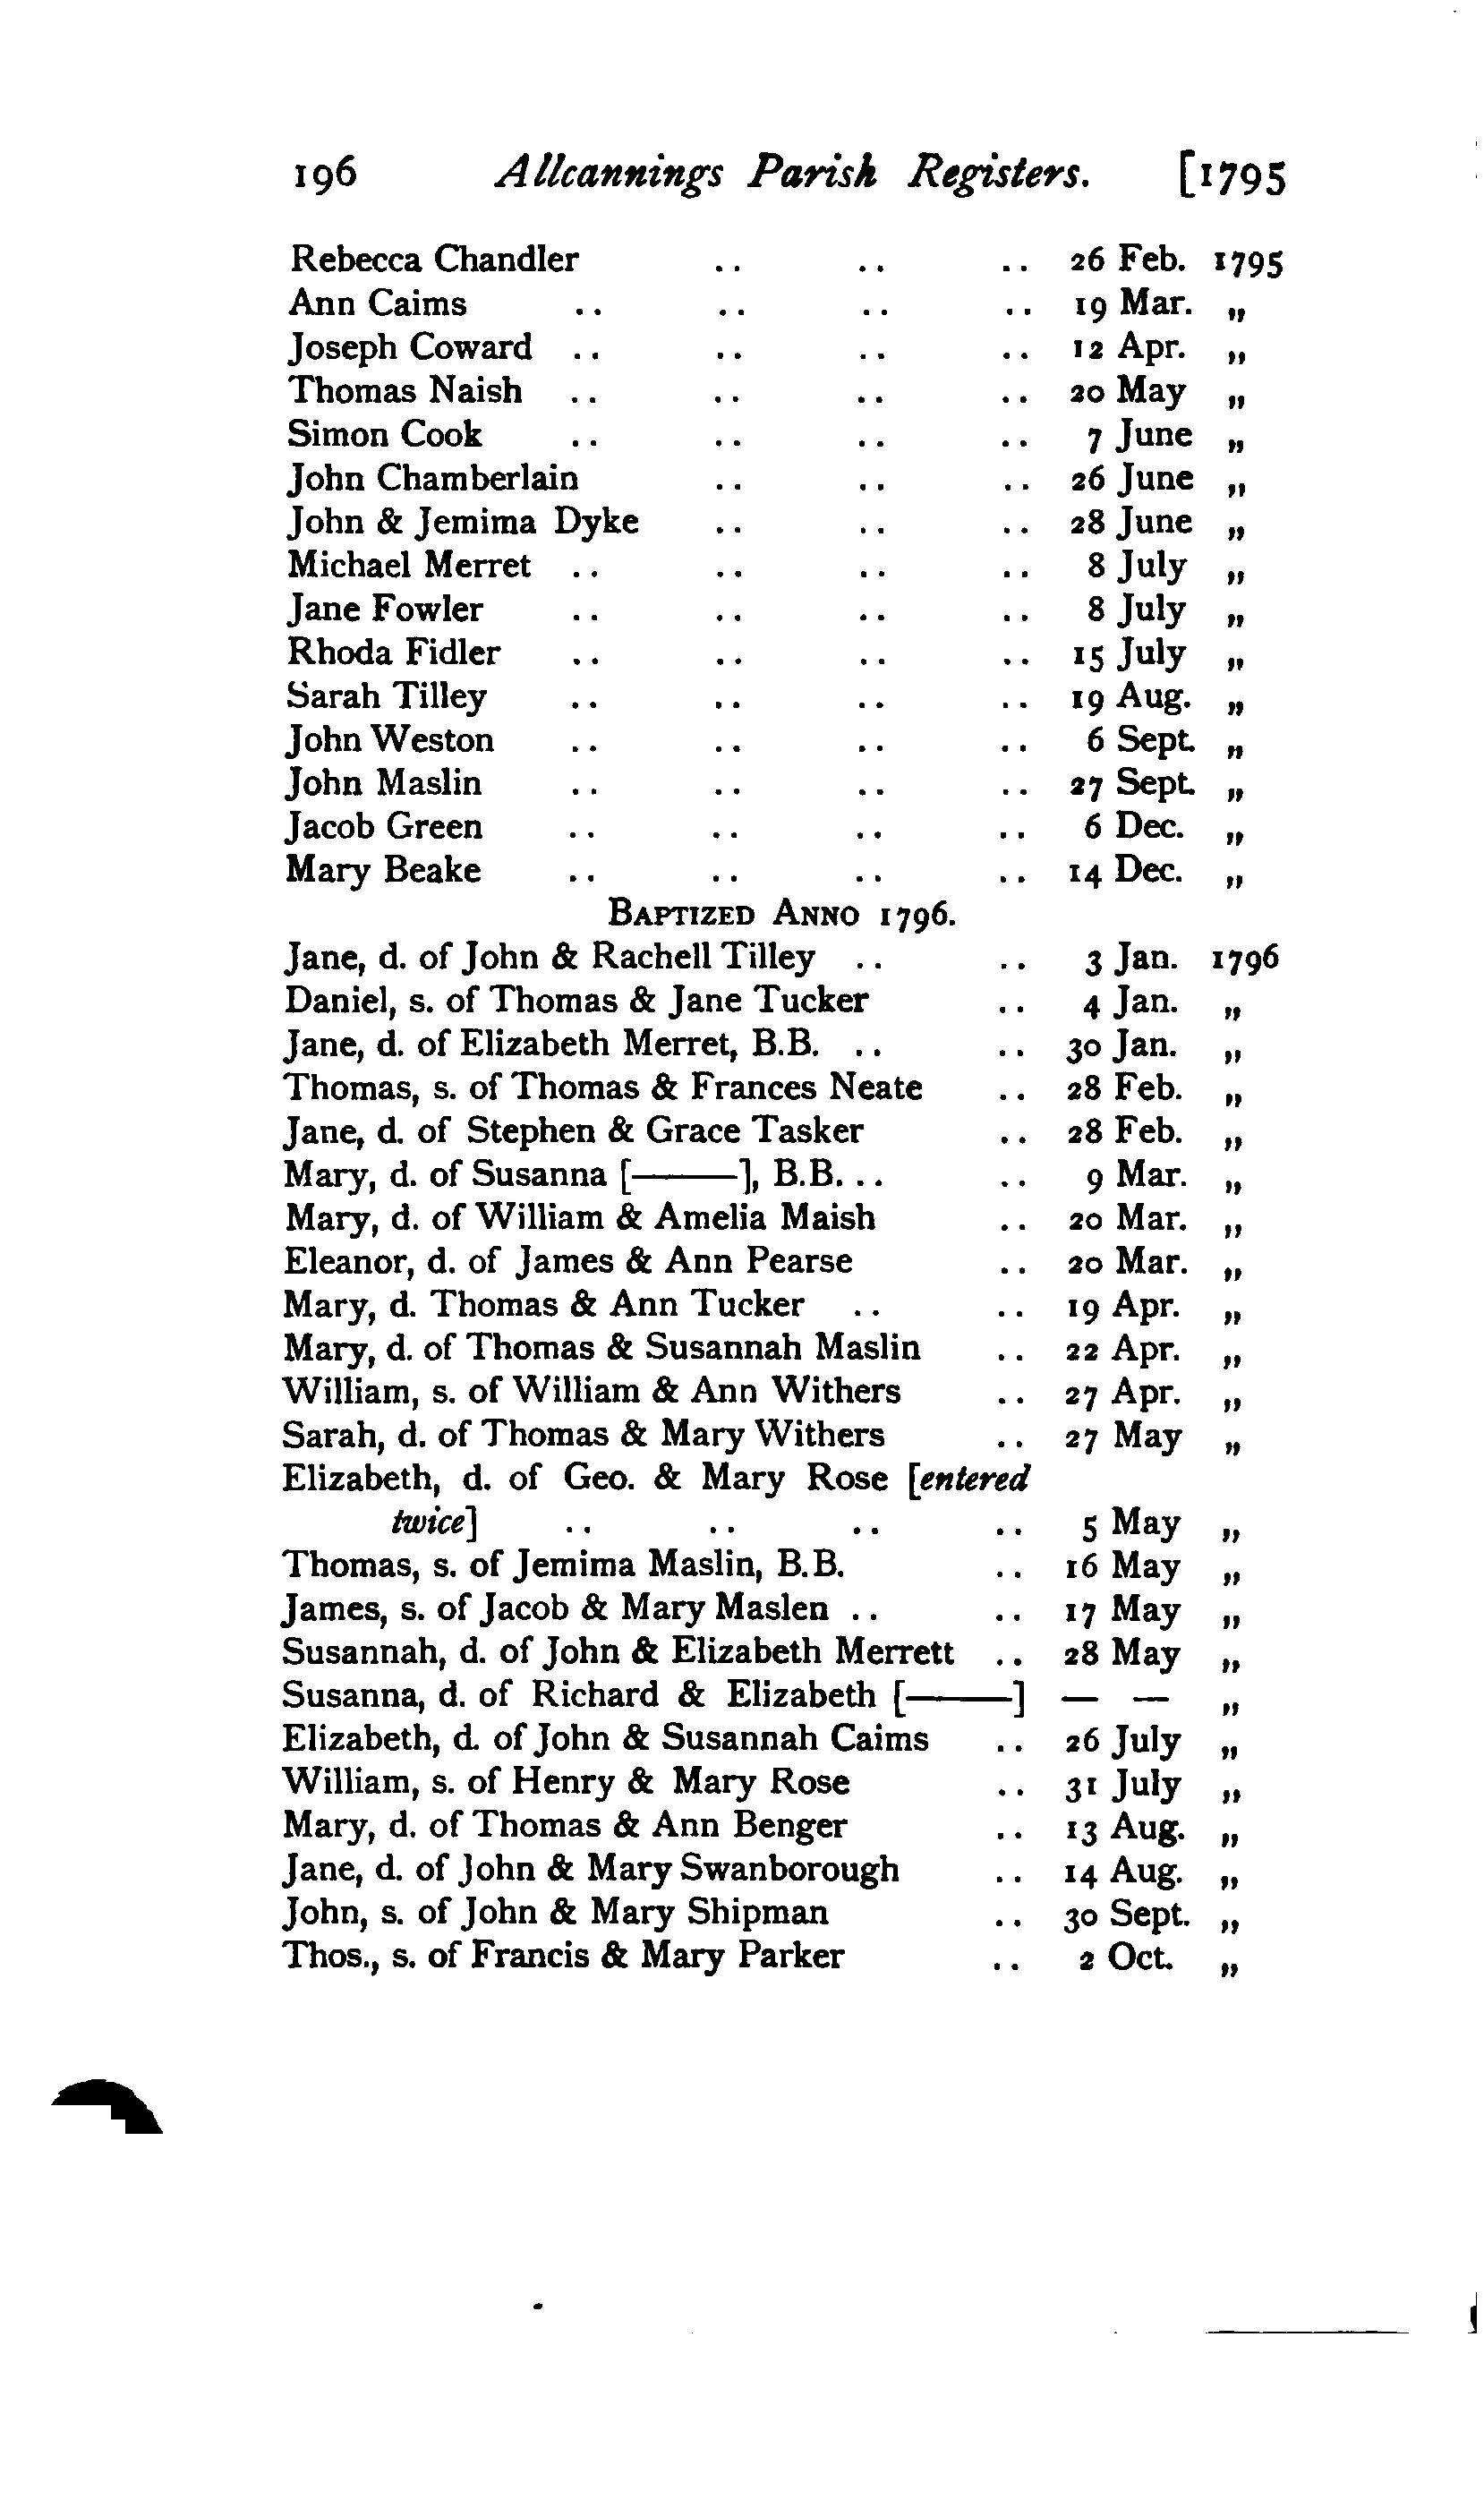 All Cannings parish registers transcribed in 1905, showing Mary Tucker\'s baptism in 1796